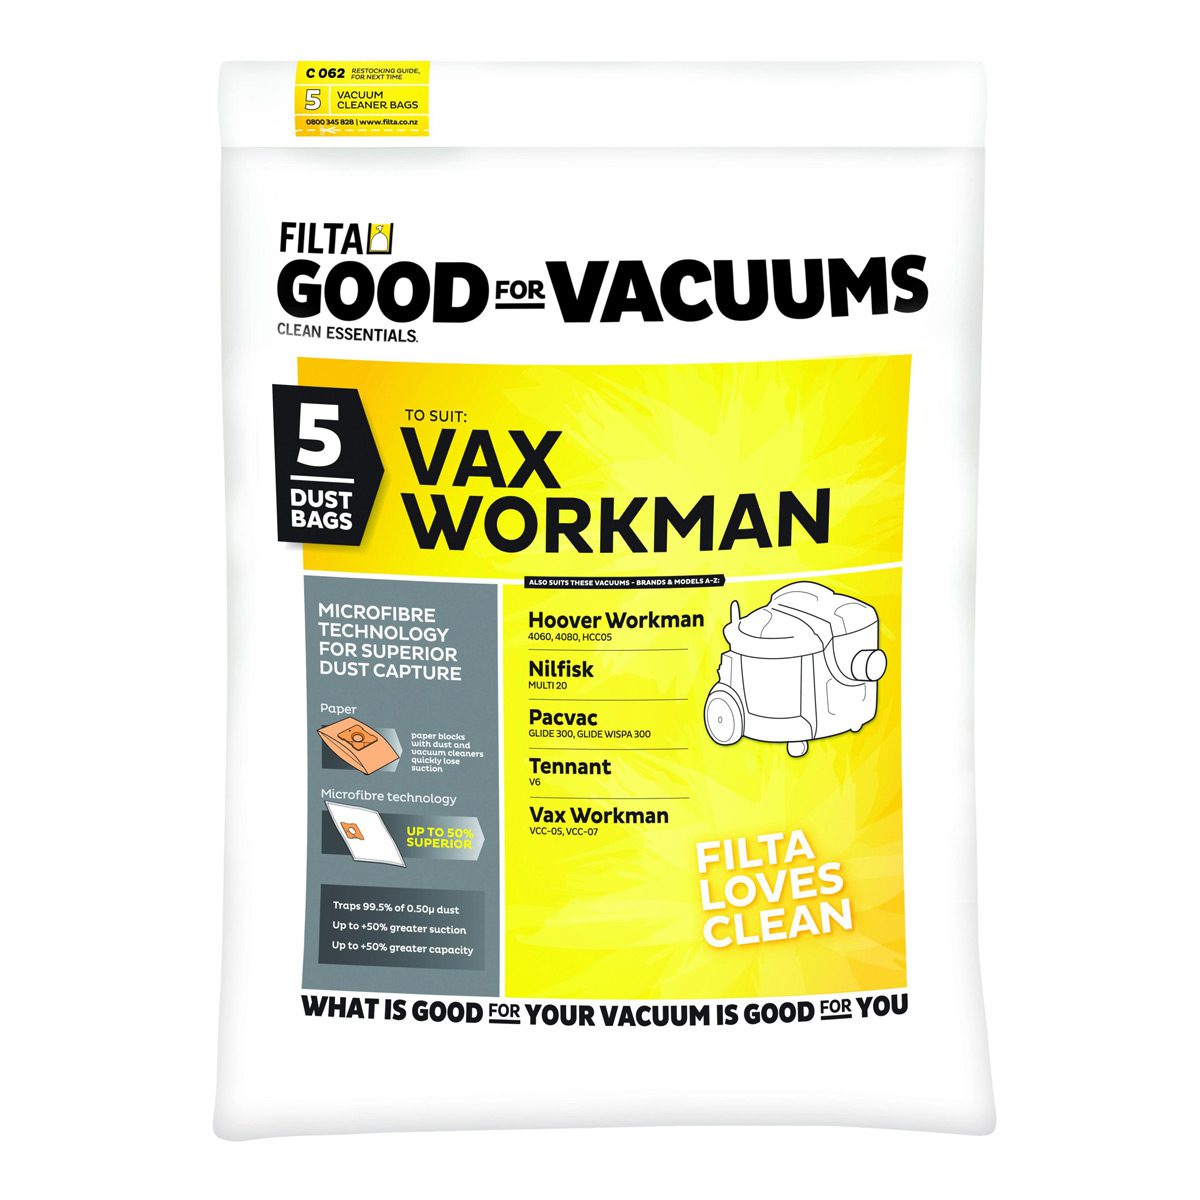 machinery-matting-vac—bags-vax-pacvac-vacuum-bags-5-pack-SMS-multi-layered-vacuum-dust-bags-for-wet-and-dry-vacuums-and-work-shop-vacuums-compatible-dewalt-nilfisk-karcher-vjs-distributors-18021